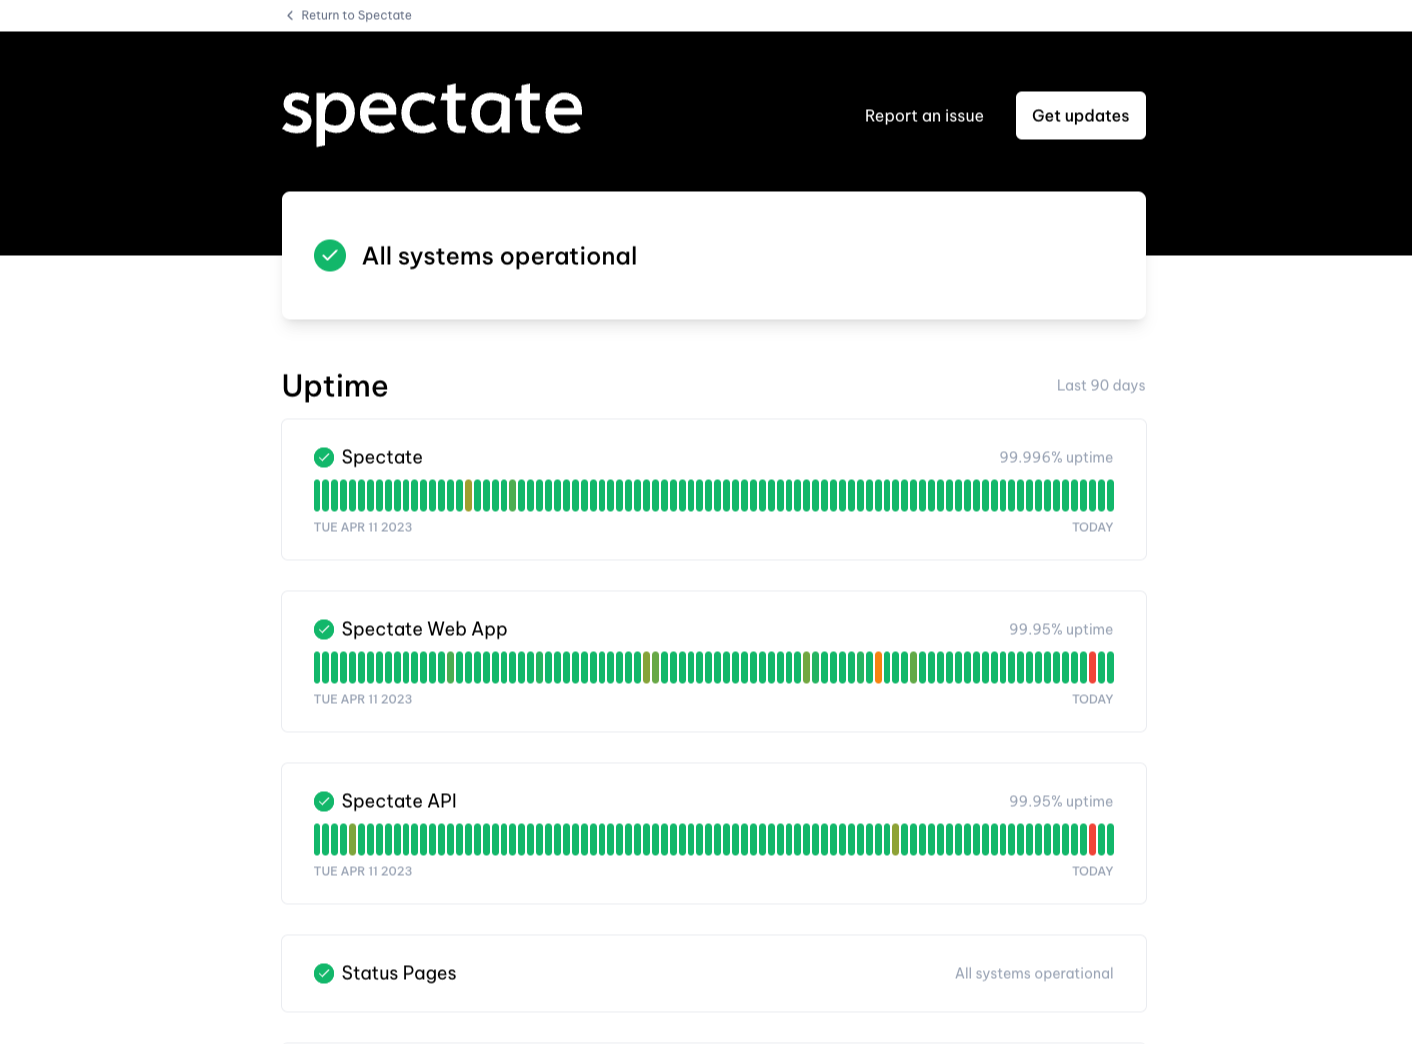 A screenshot of the Spectate status page